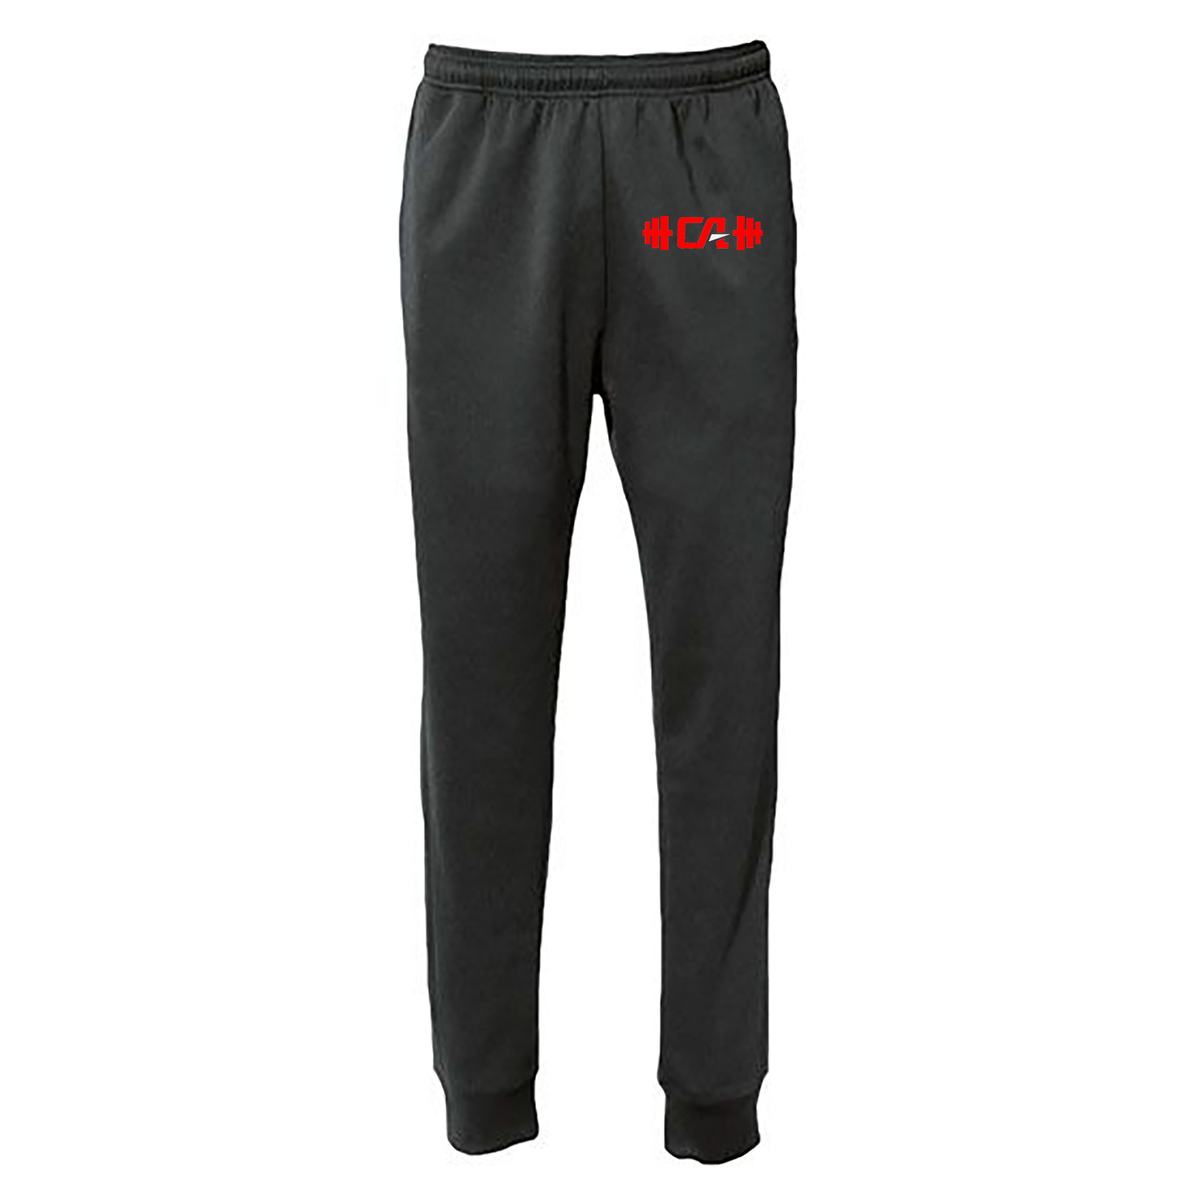 Clubhouse Performance Joggers